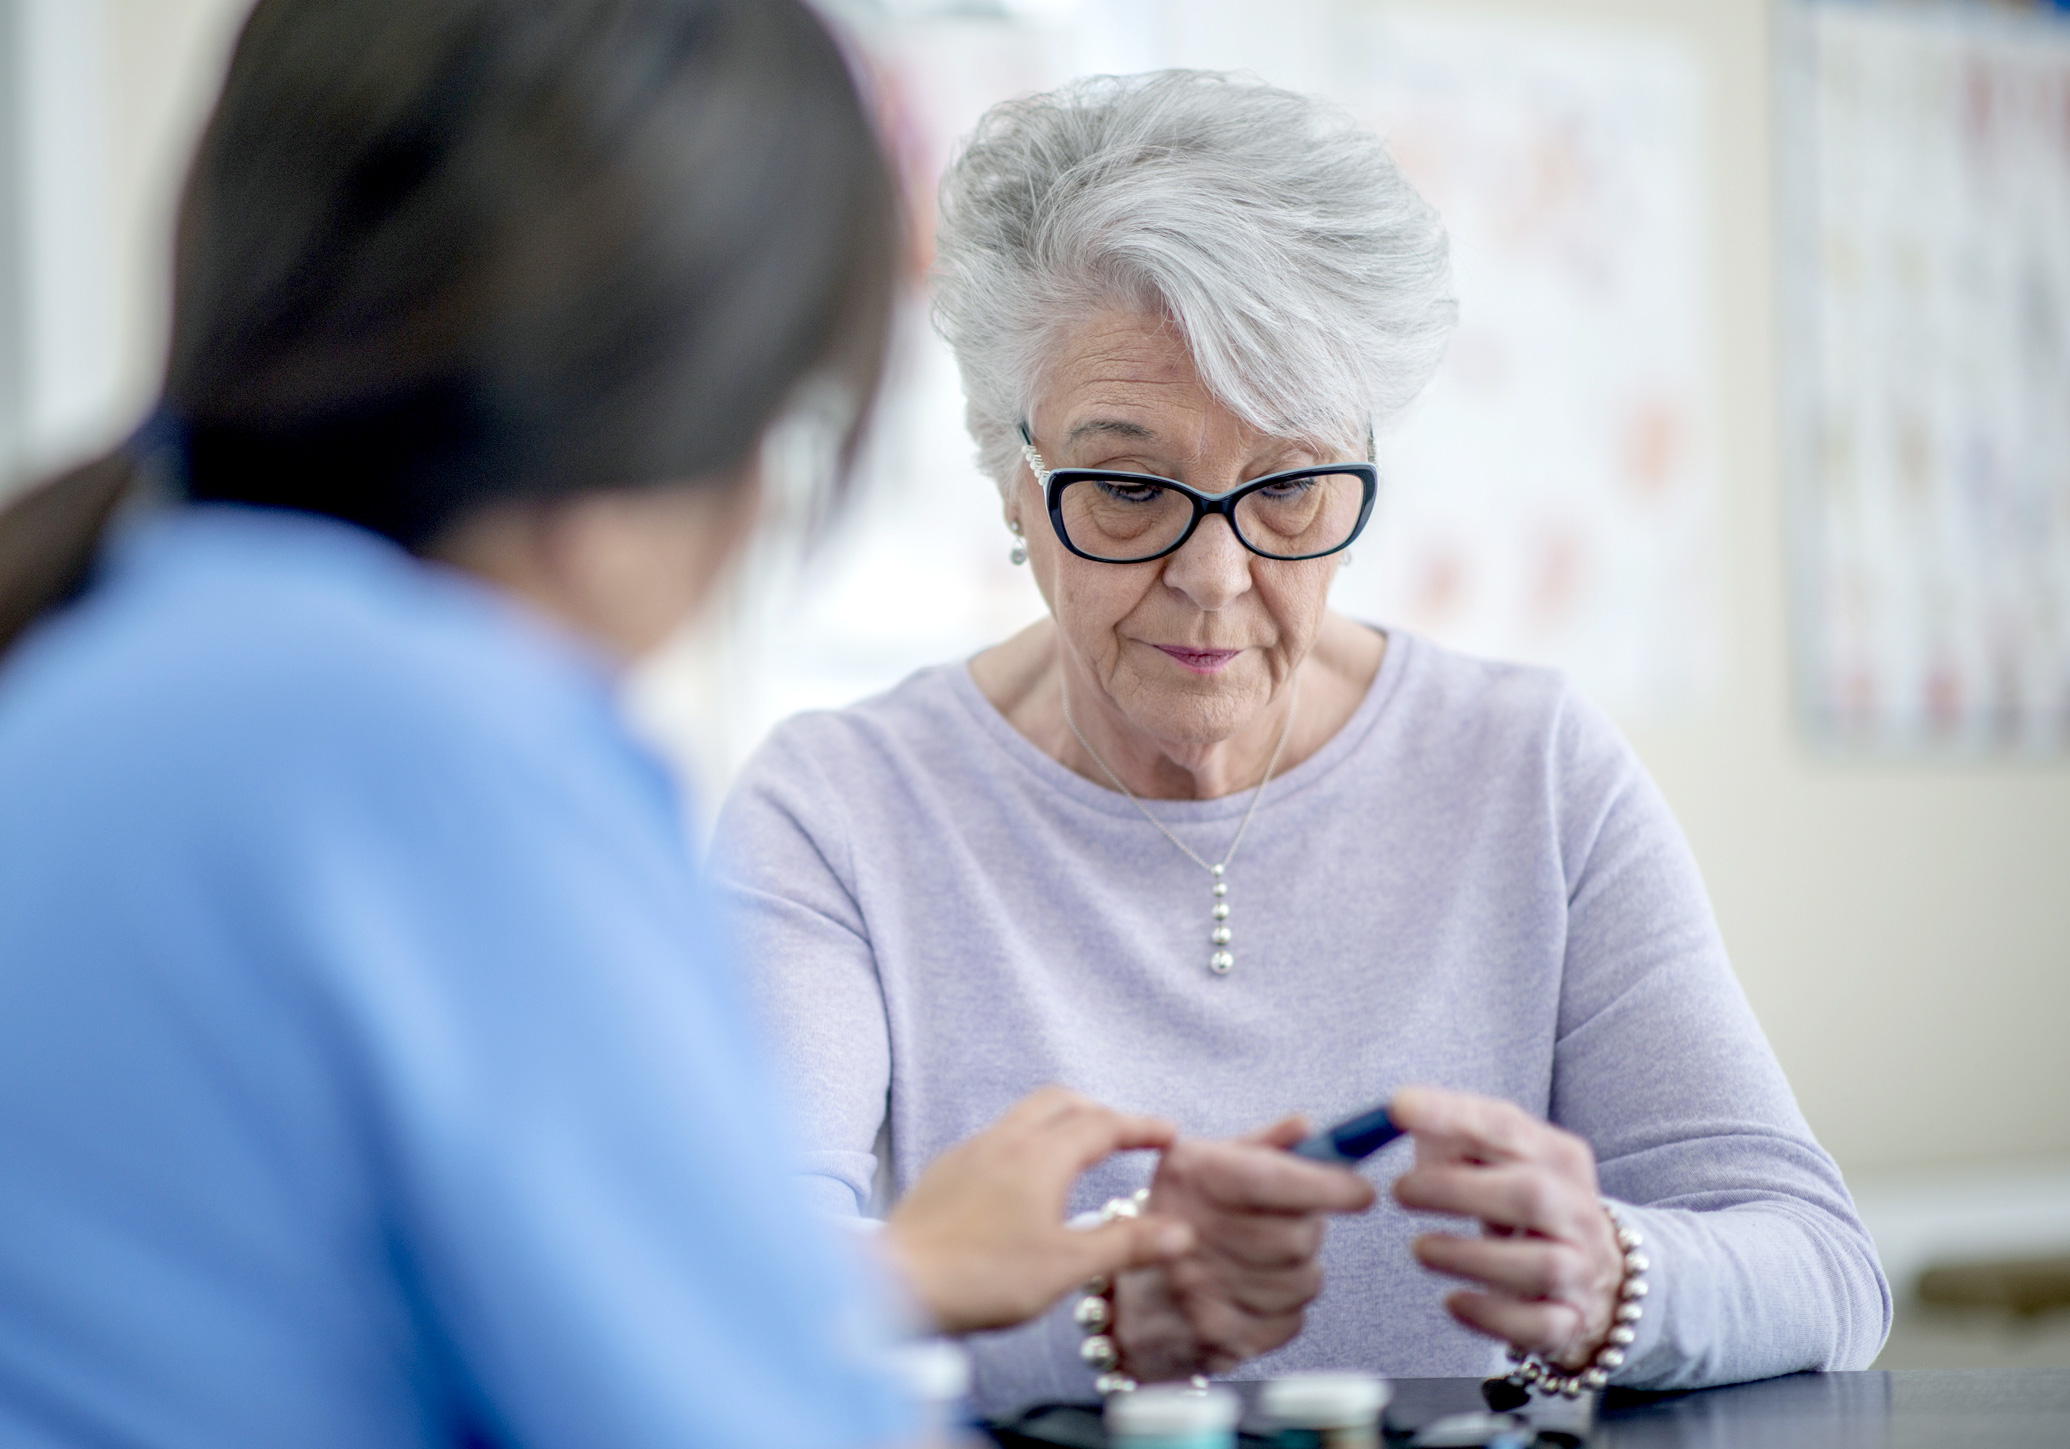 Doctor meets with diabetic senior woman at medical appointment